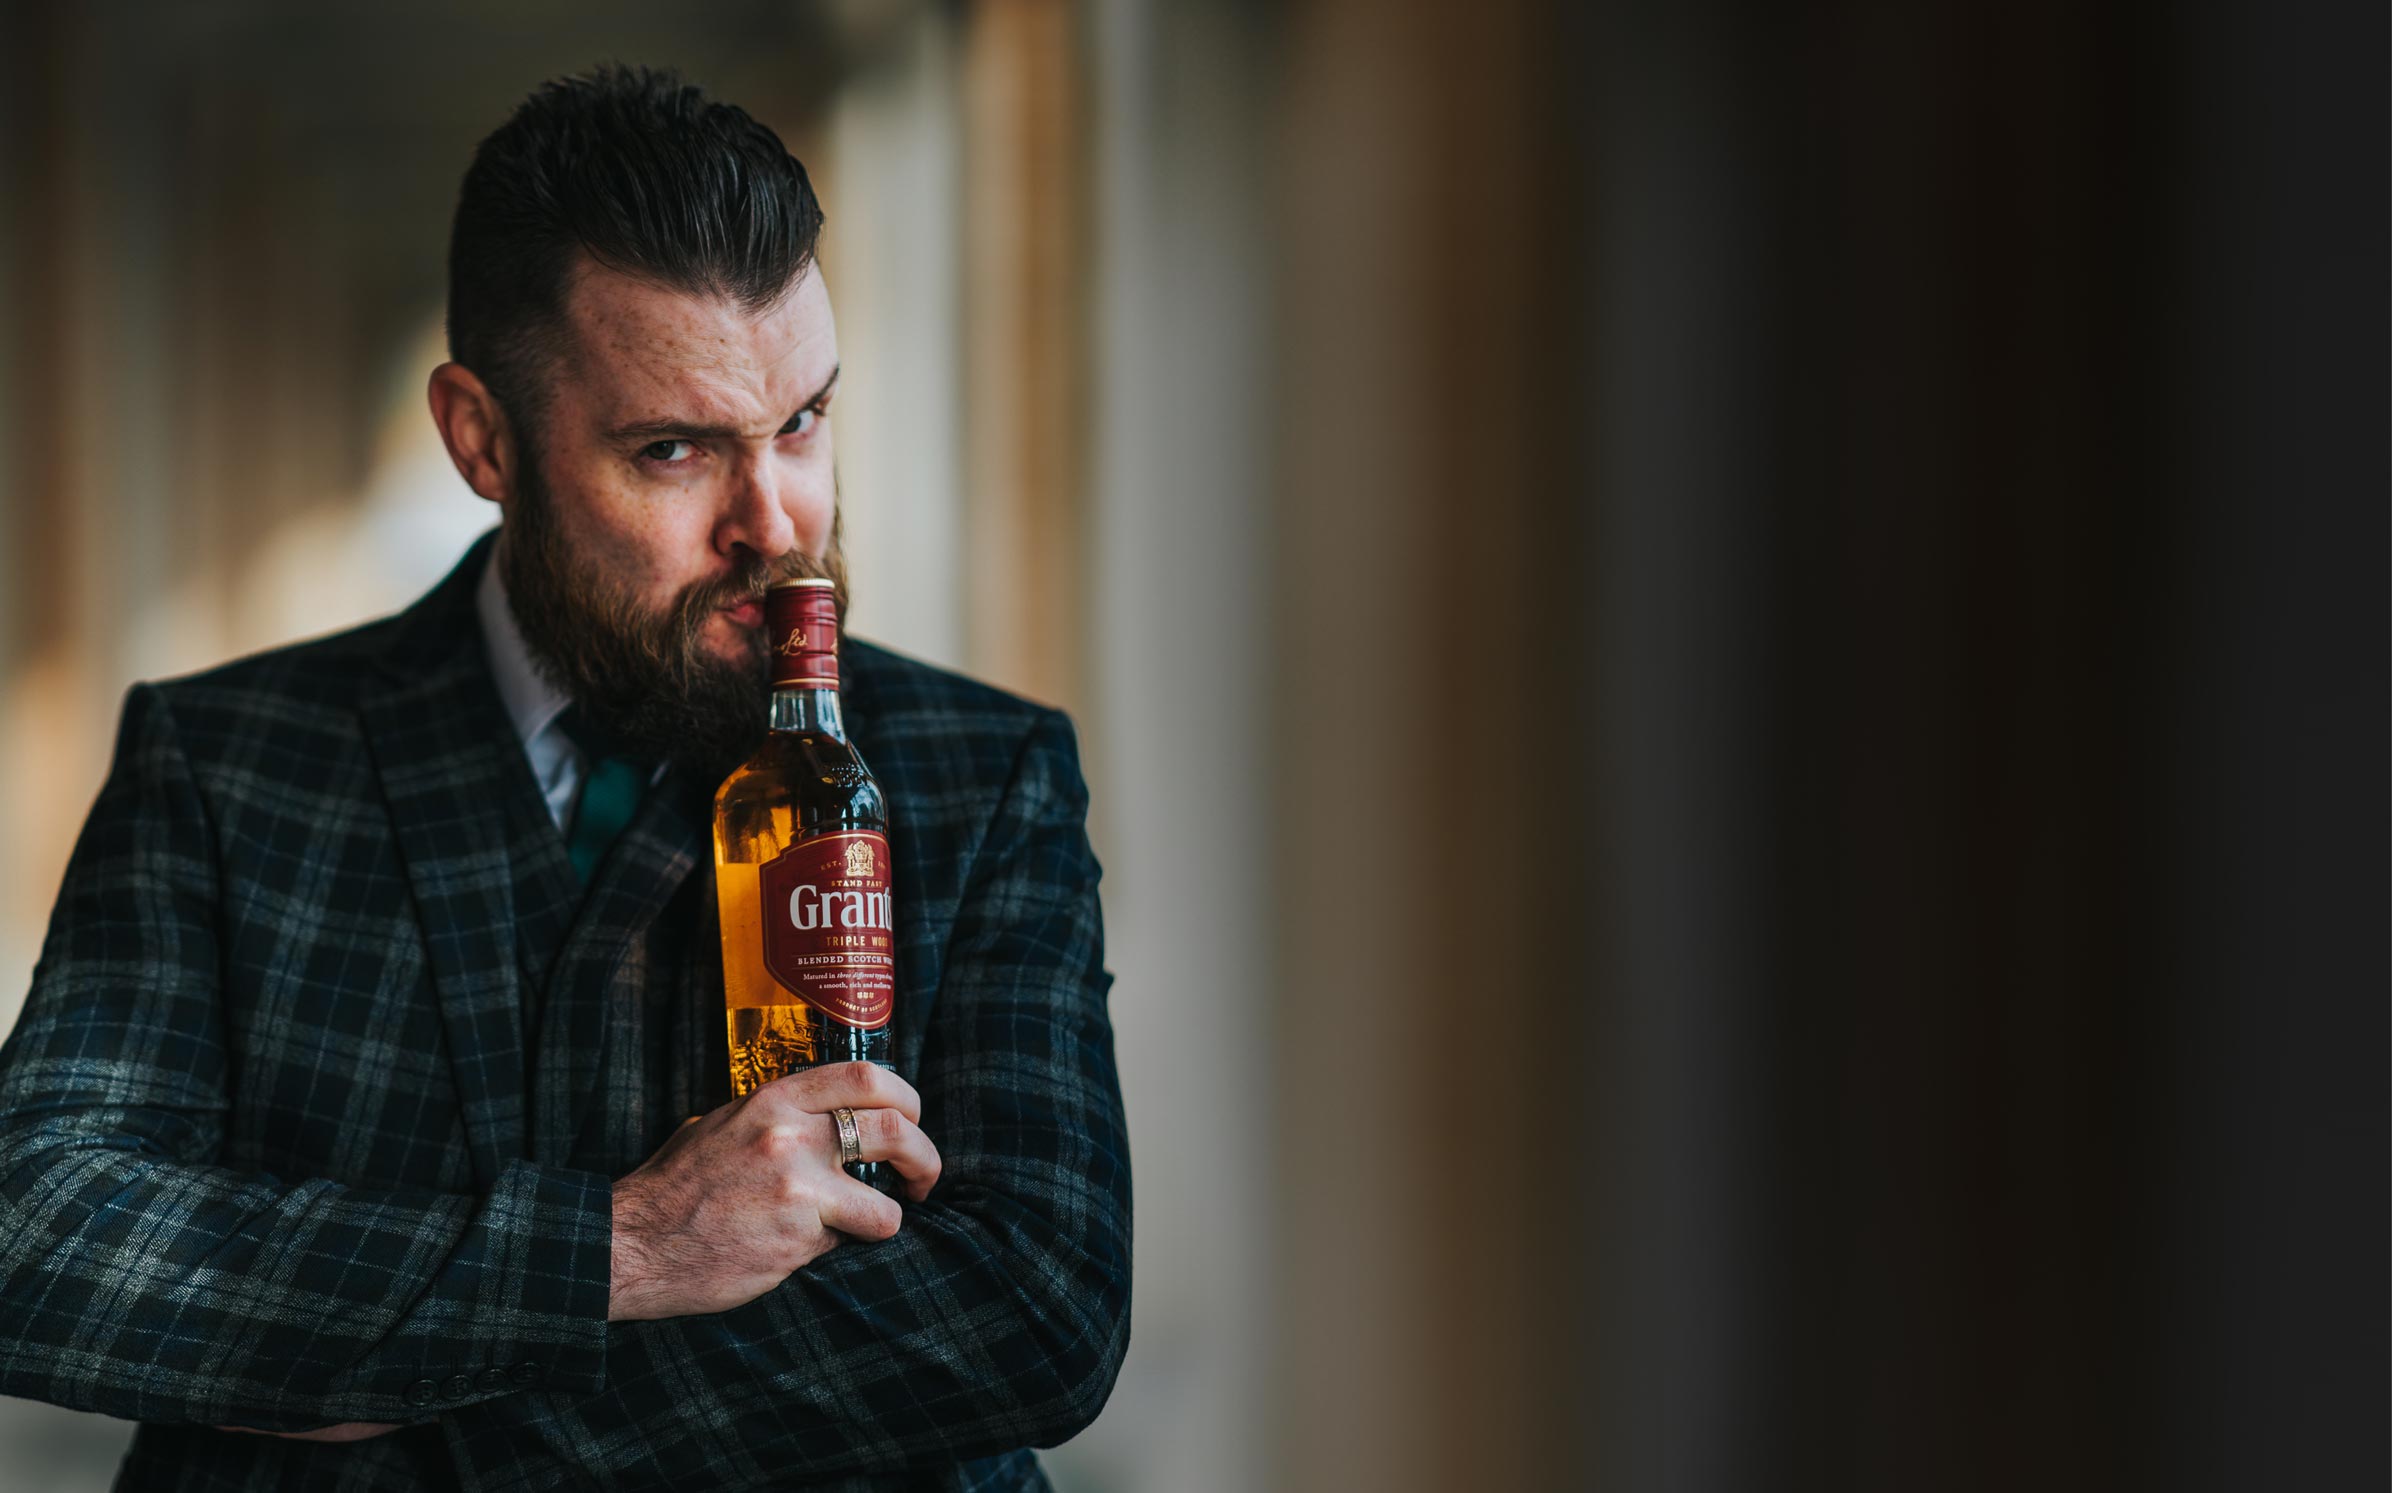 Grant's brand ambassador Danny Dyer wearing a suit and holding a bottle of triple wood 12